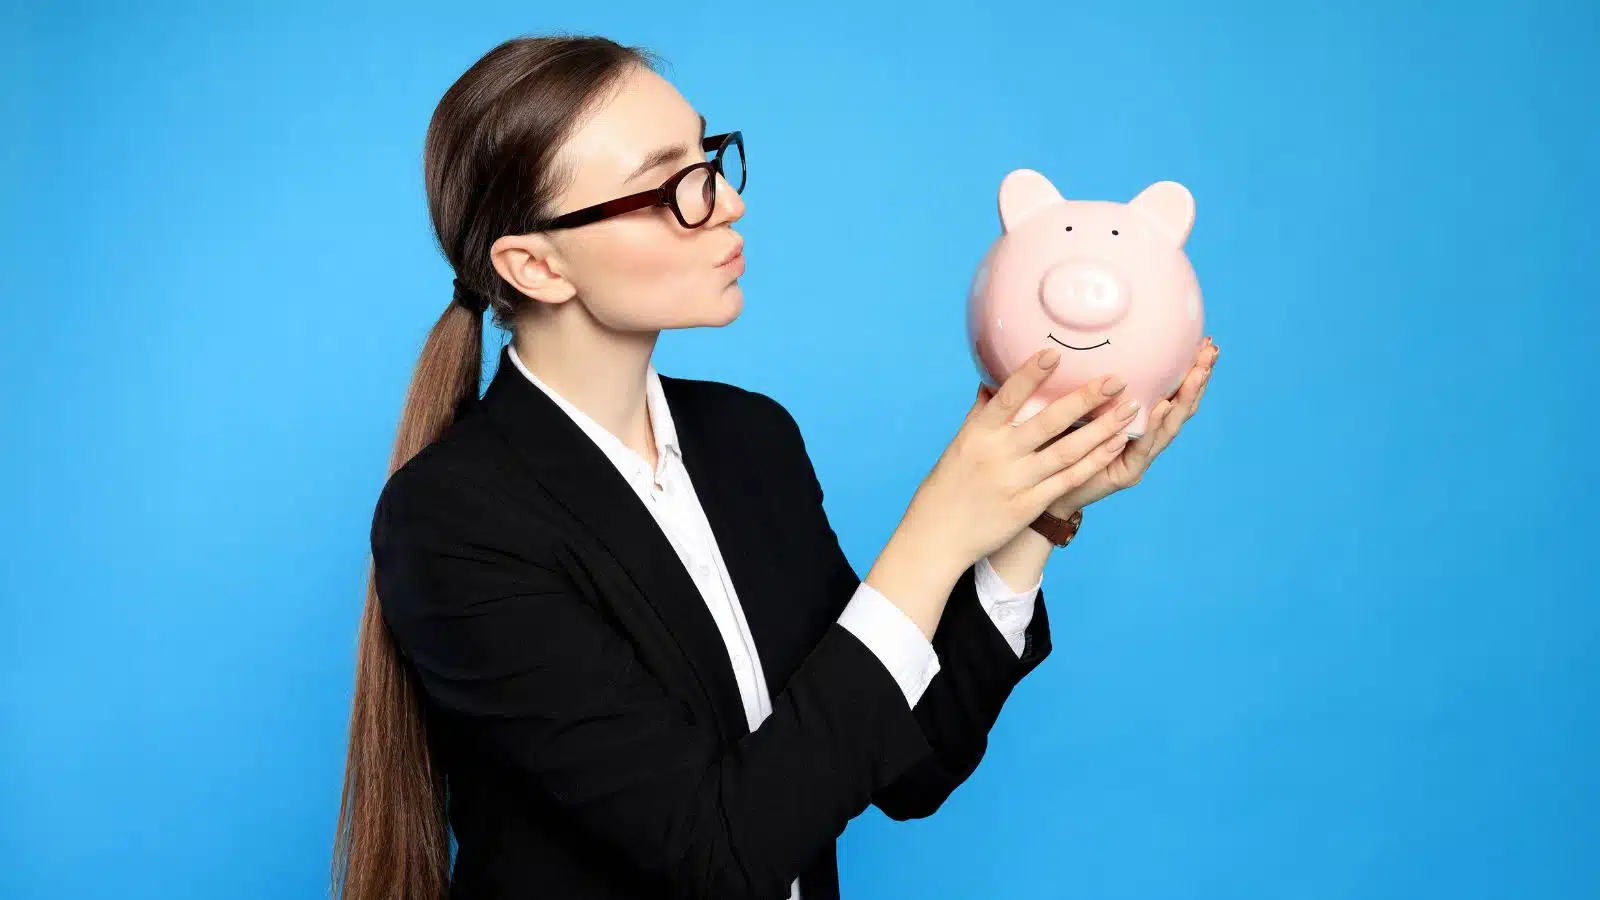 a young woman holding a piggy bank on a blue background